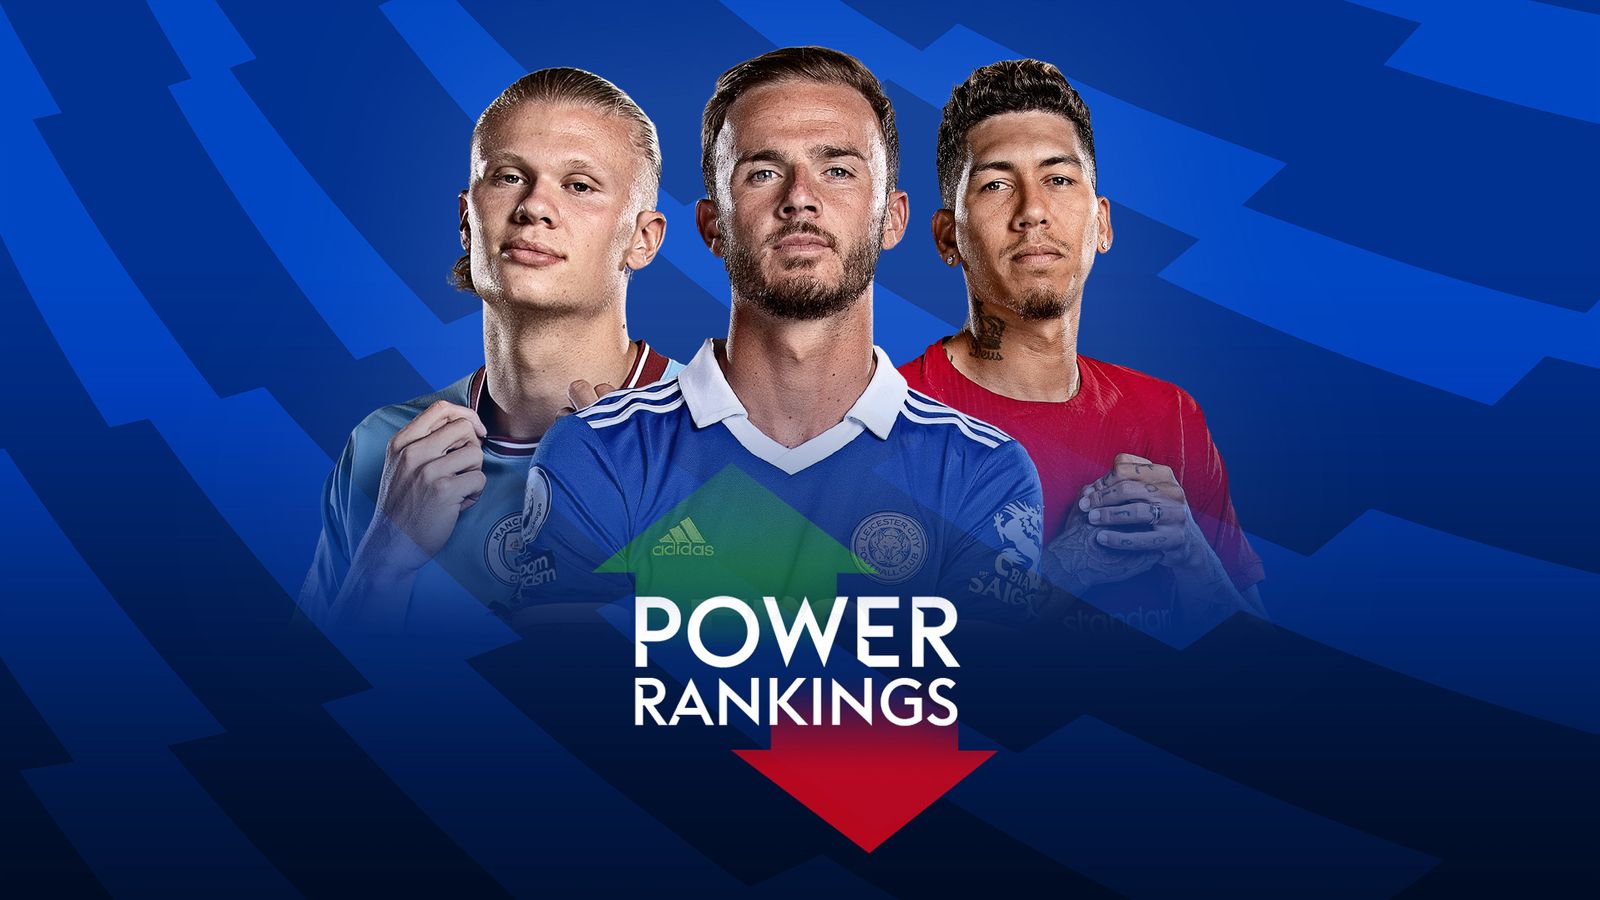 James Maddison secures third spot in chart | Erling Haaland and Roberto Firmino flying high